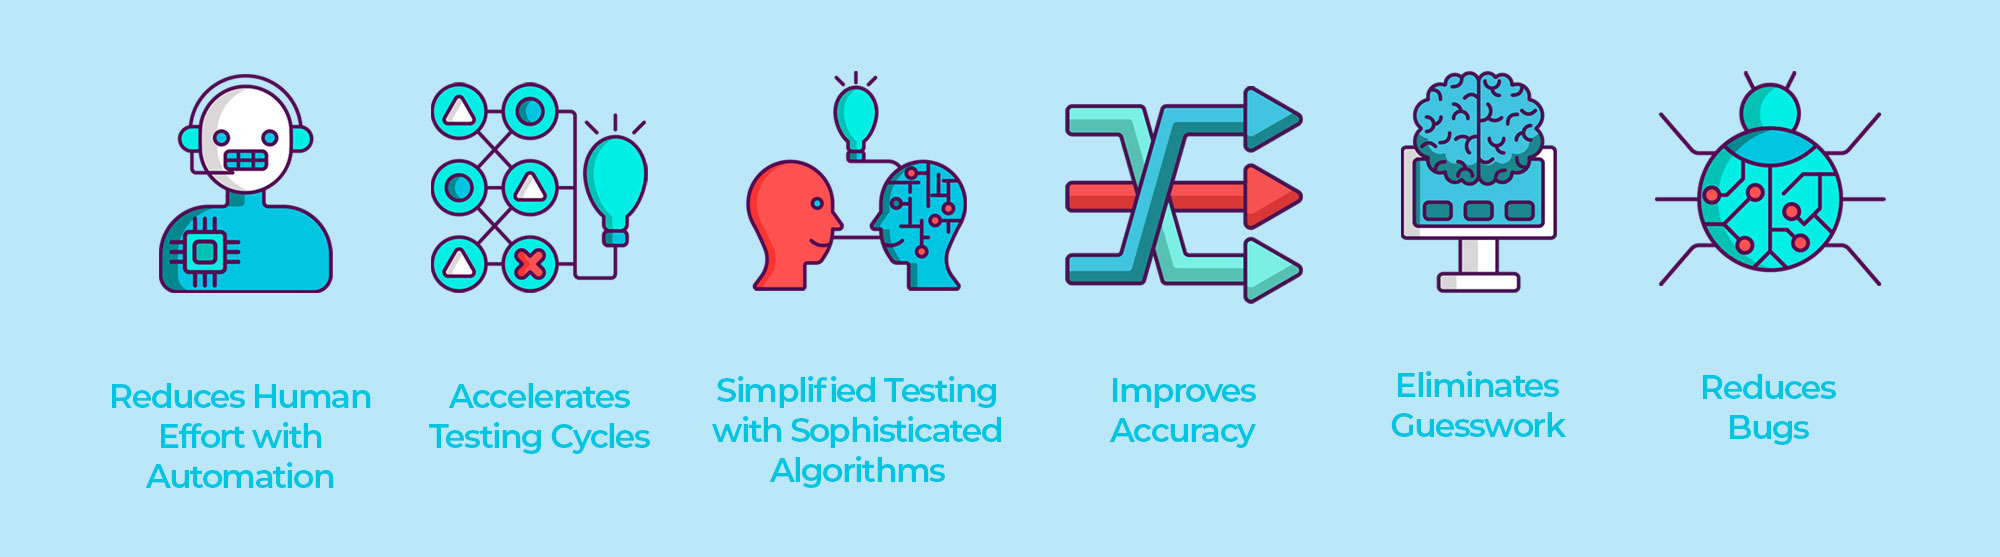 Benefits of Integrating ML and AI in Software Testing